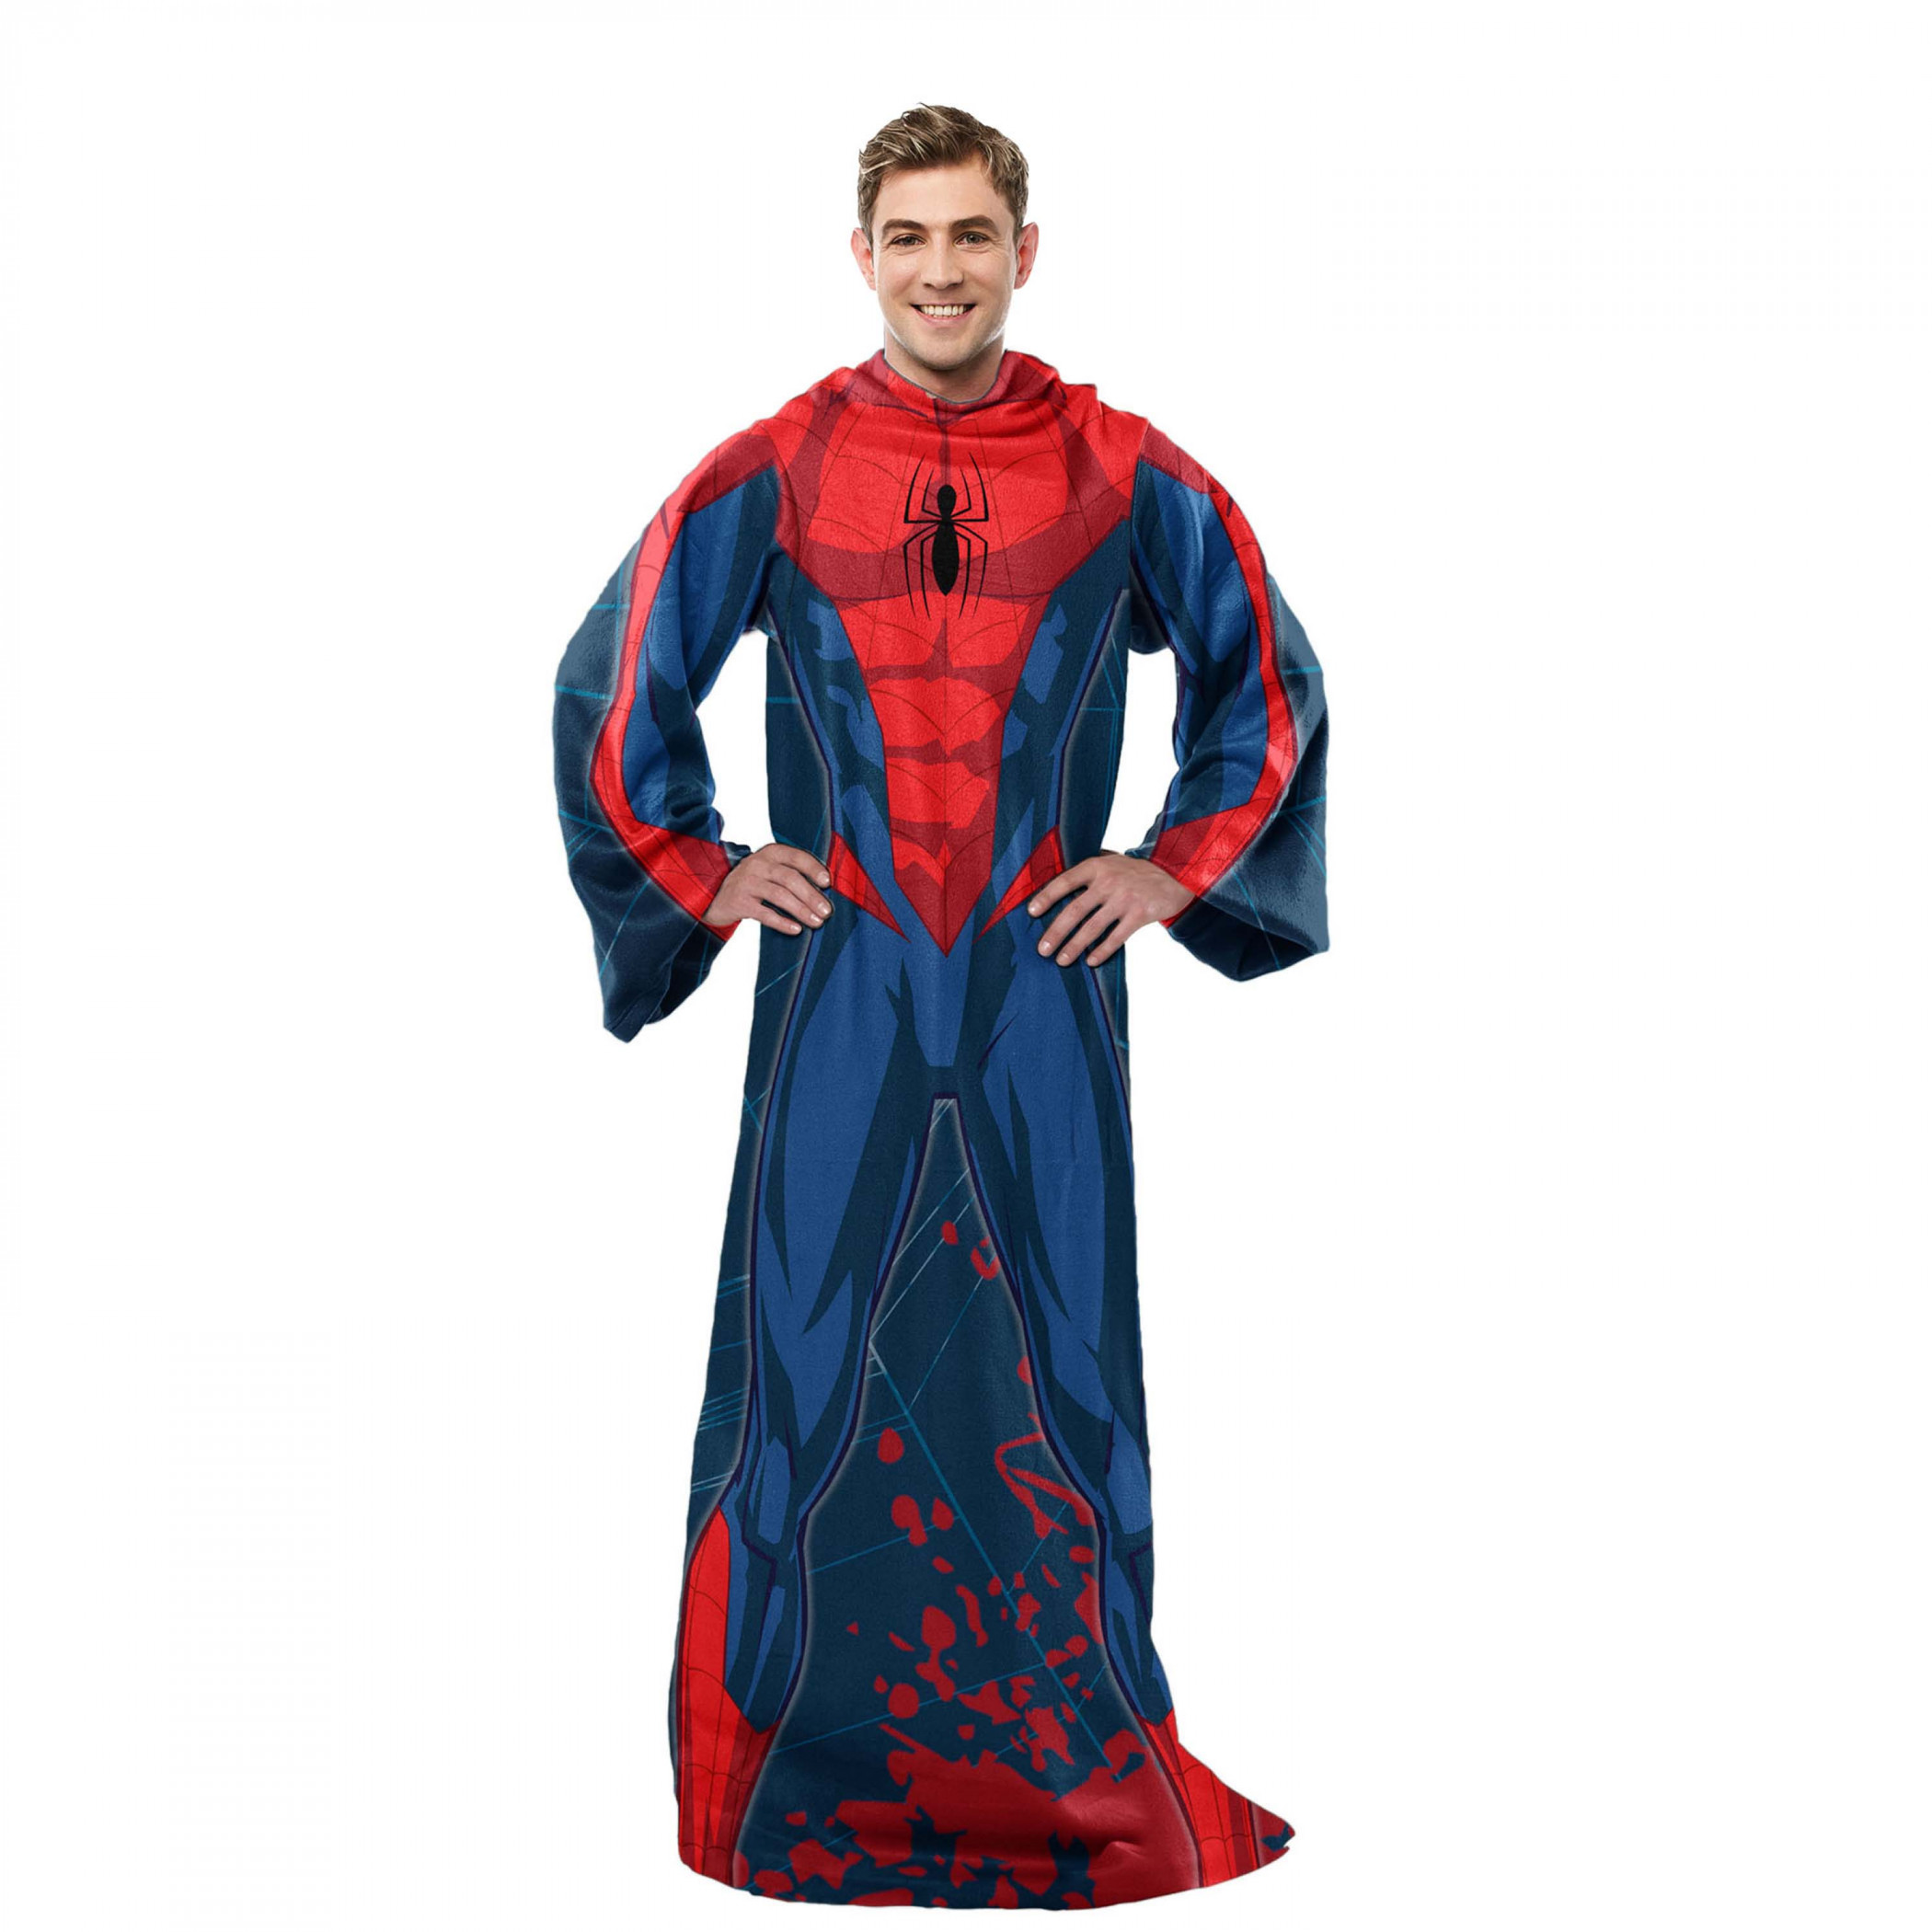 Spider-Man Silk Touch Comfy Throw Blanket with Sleeves 48" x 71"